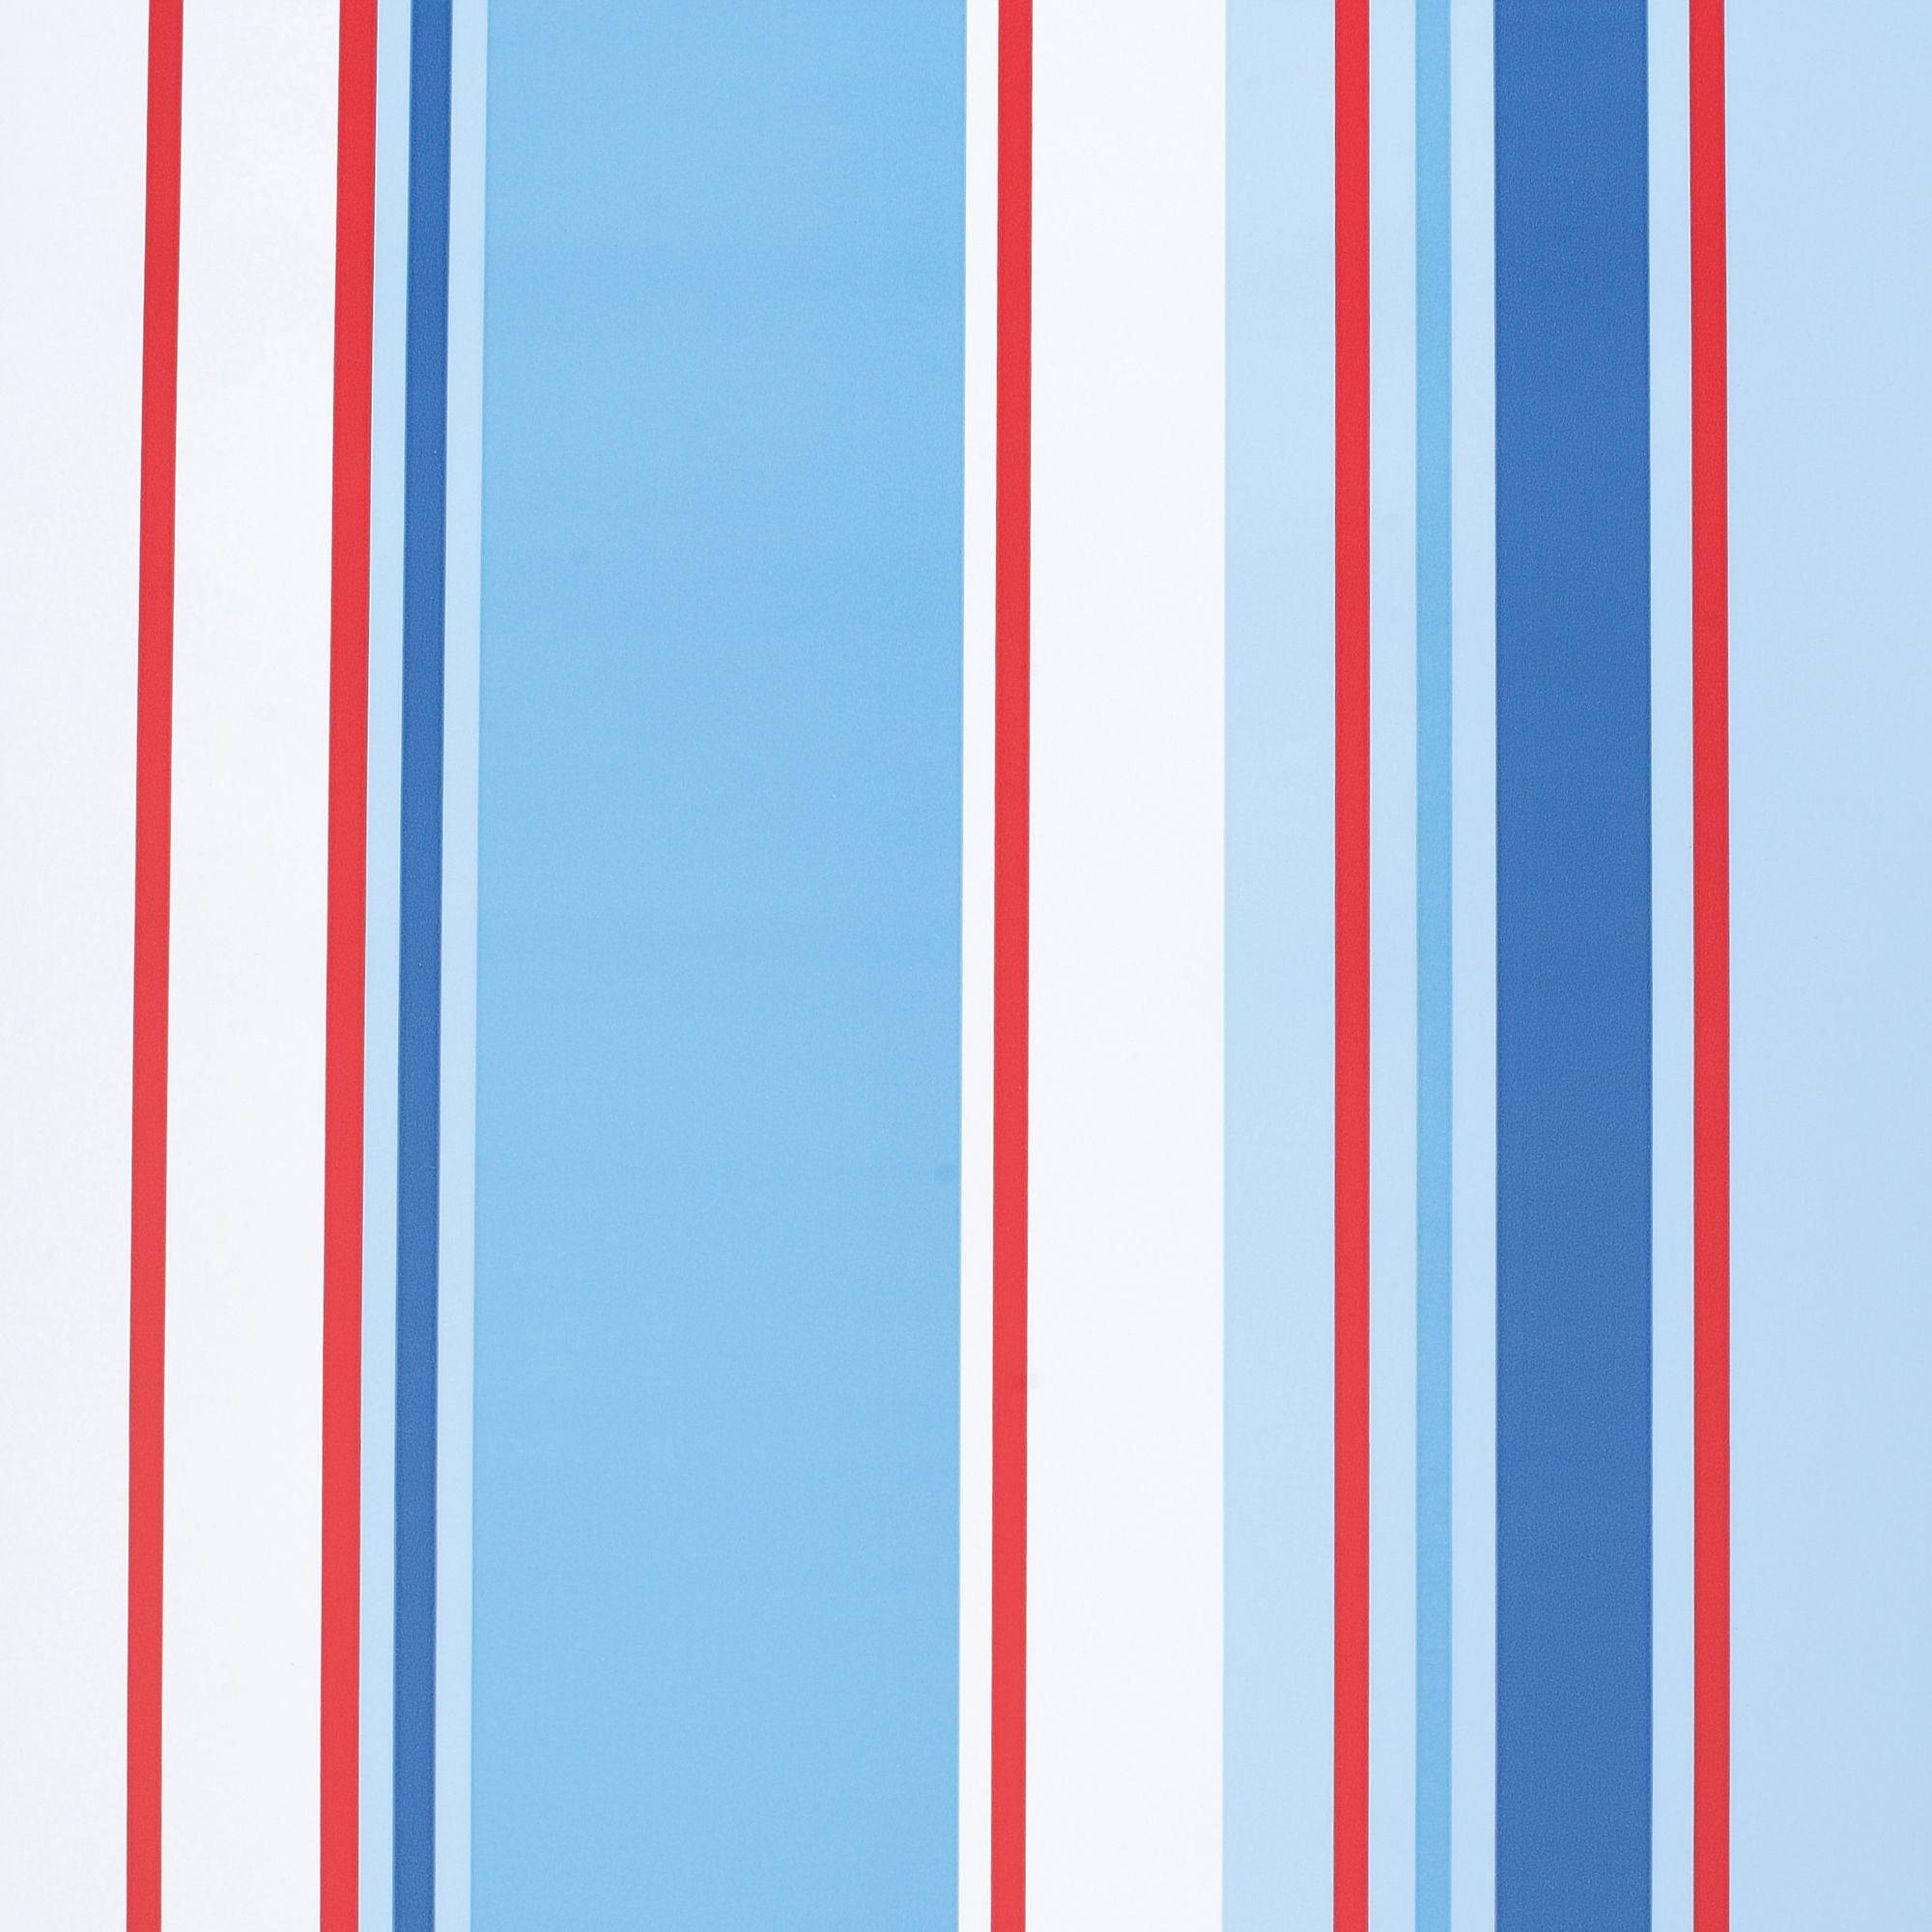 aesthetic wallpaper redblue for iPhone 12  Blue colour wallpaper  Aesthetic iphone wallpaper Blue wallpaper iphone